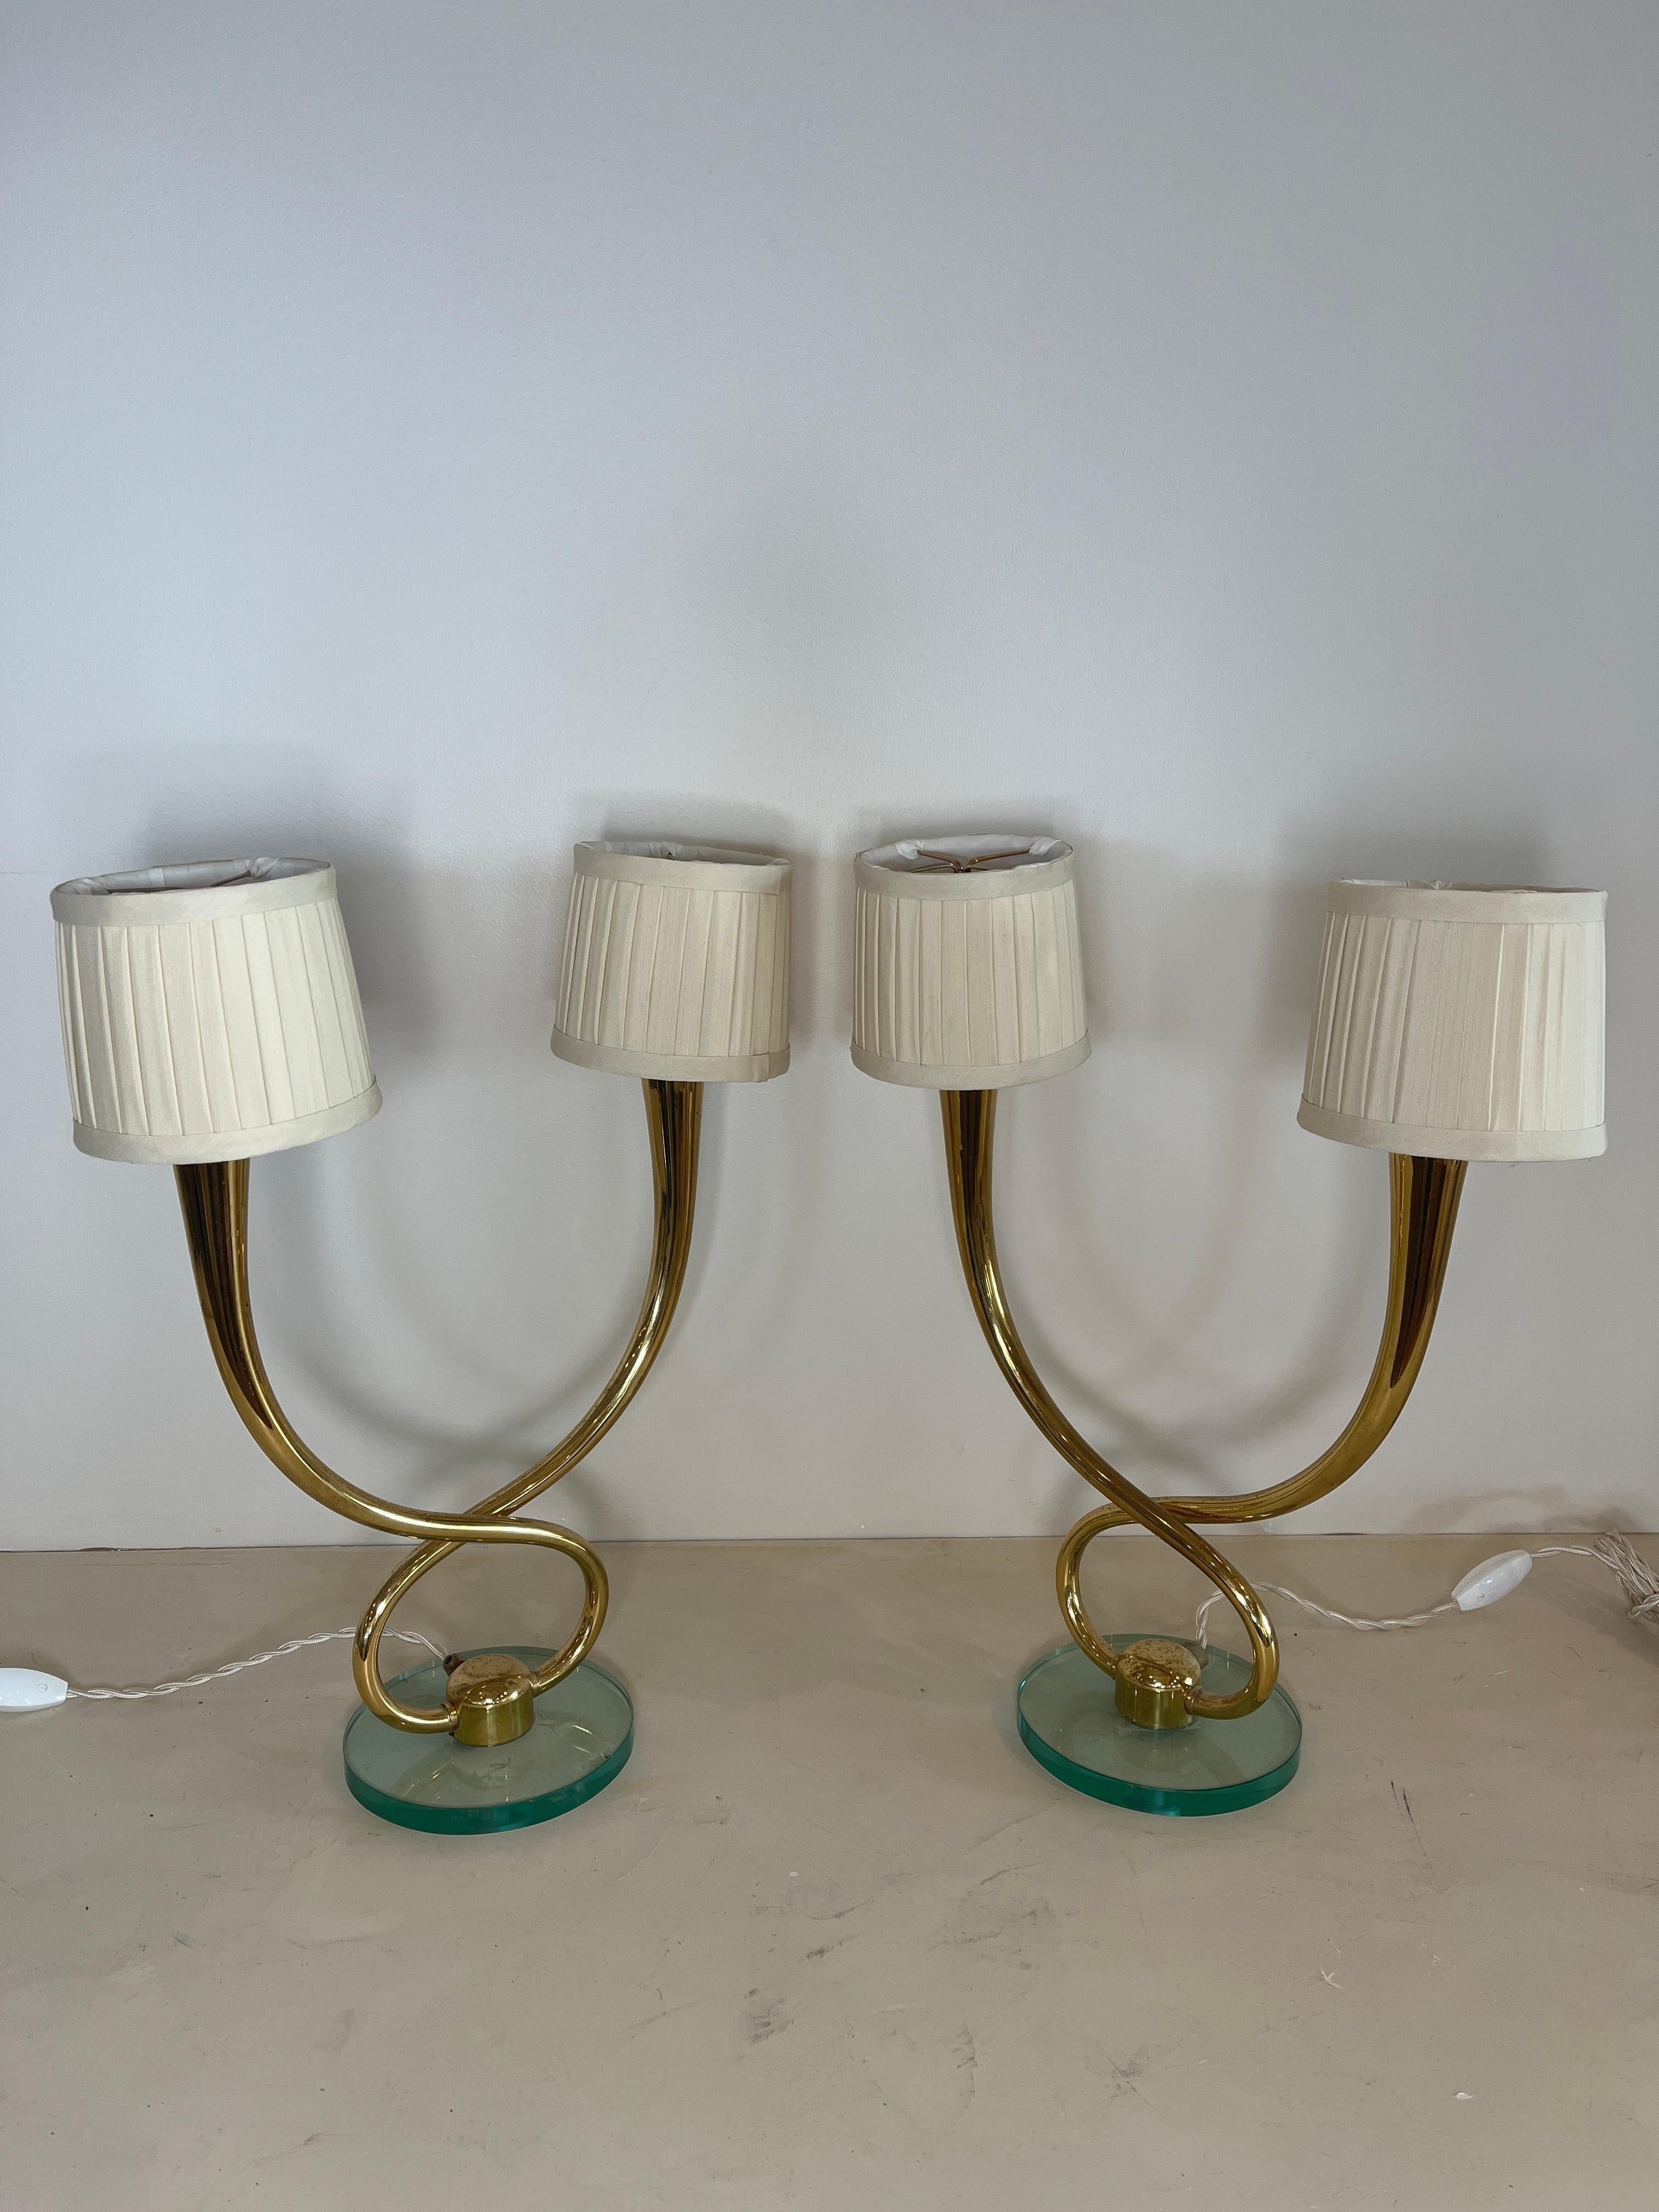 Pair of midcentury Italian table lamps, each with two lights on intertwined polished brass arms, stretching upward in a U-shape, and topped with ivory pleated shades. Base is a circle of molded glass. 

Newly rewired for USA, in good working